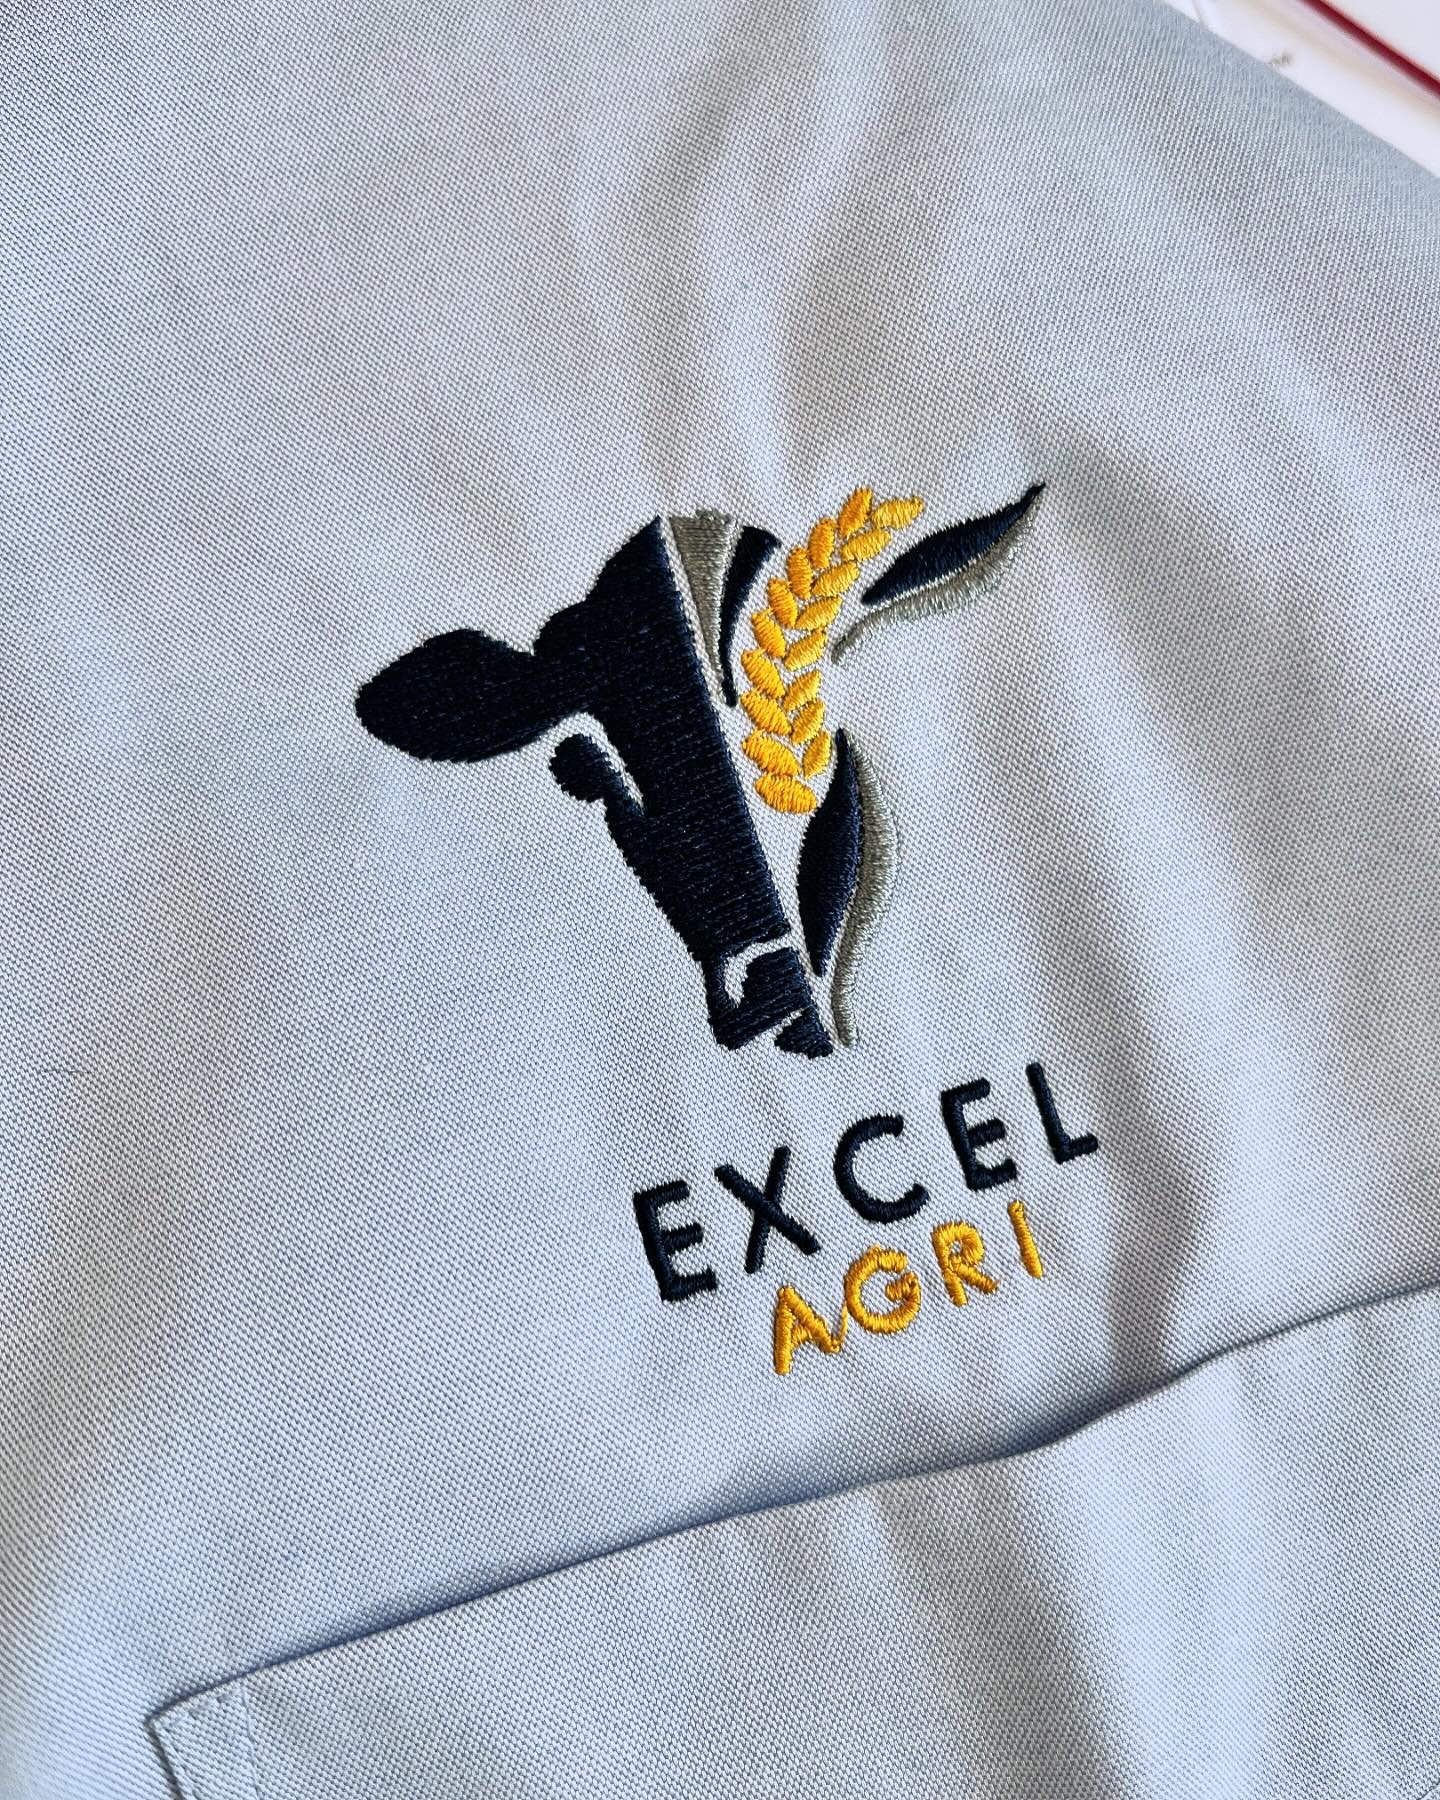 Really lovely design for a local company. Our commercial side takes great pride in providing excellent quality and service. No minimum order, just order what you need when you need it. #smallbusiness #commercialembroidery #workwear #northdevon #north